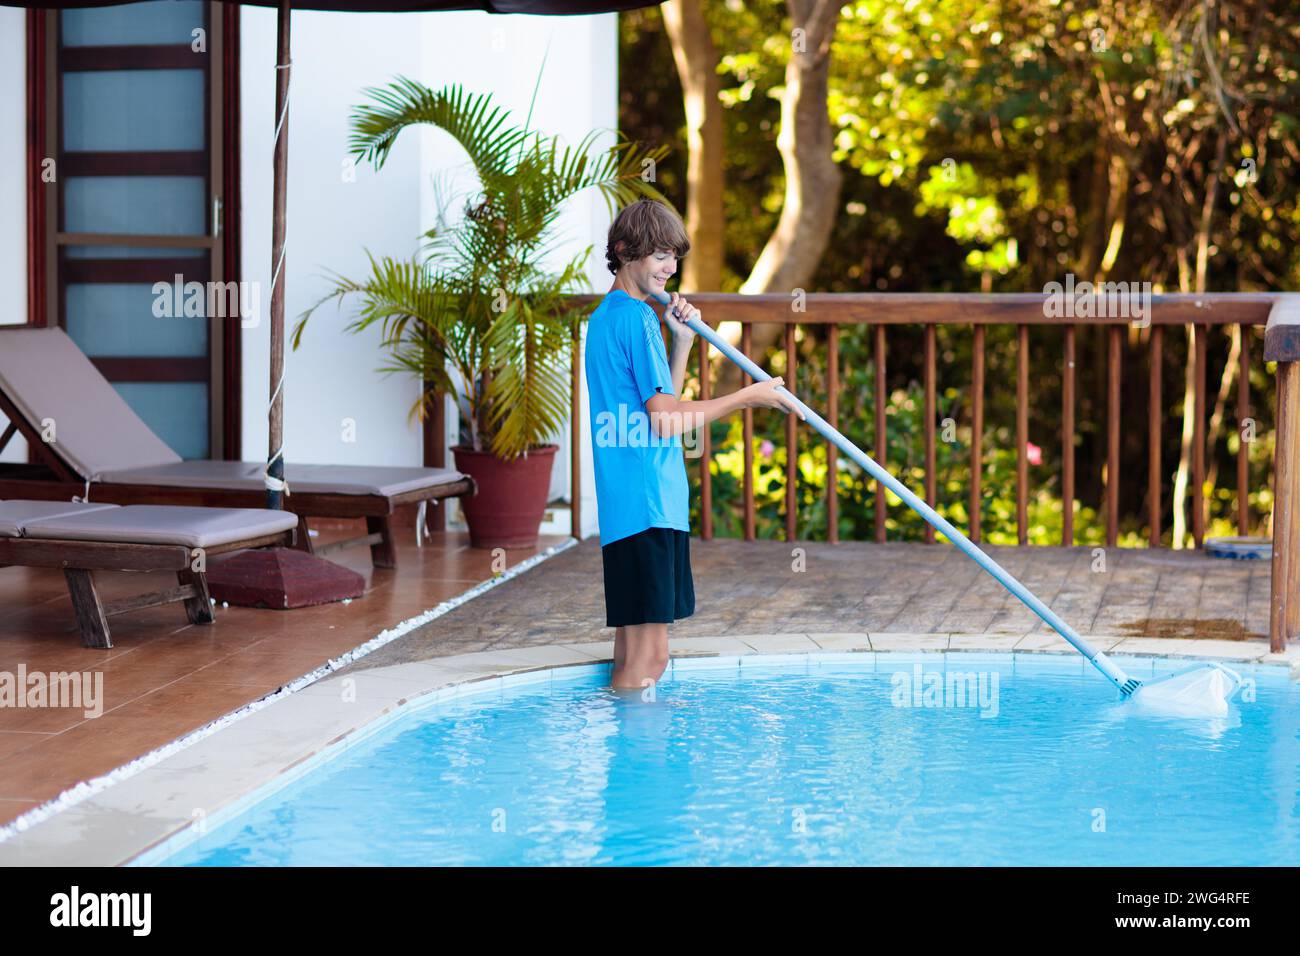 Boy cleaning swimming pool. Maintenance and service for outdoor pool. Teenager after school job and house help. Teen student picking foliage leaf Stock Photo